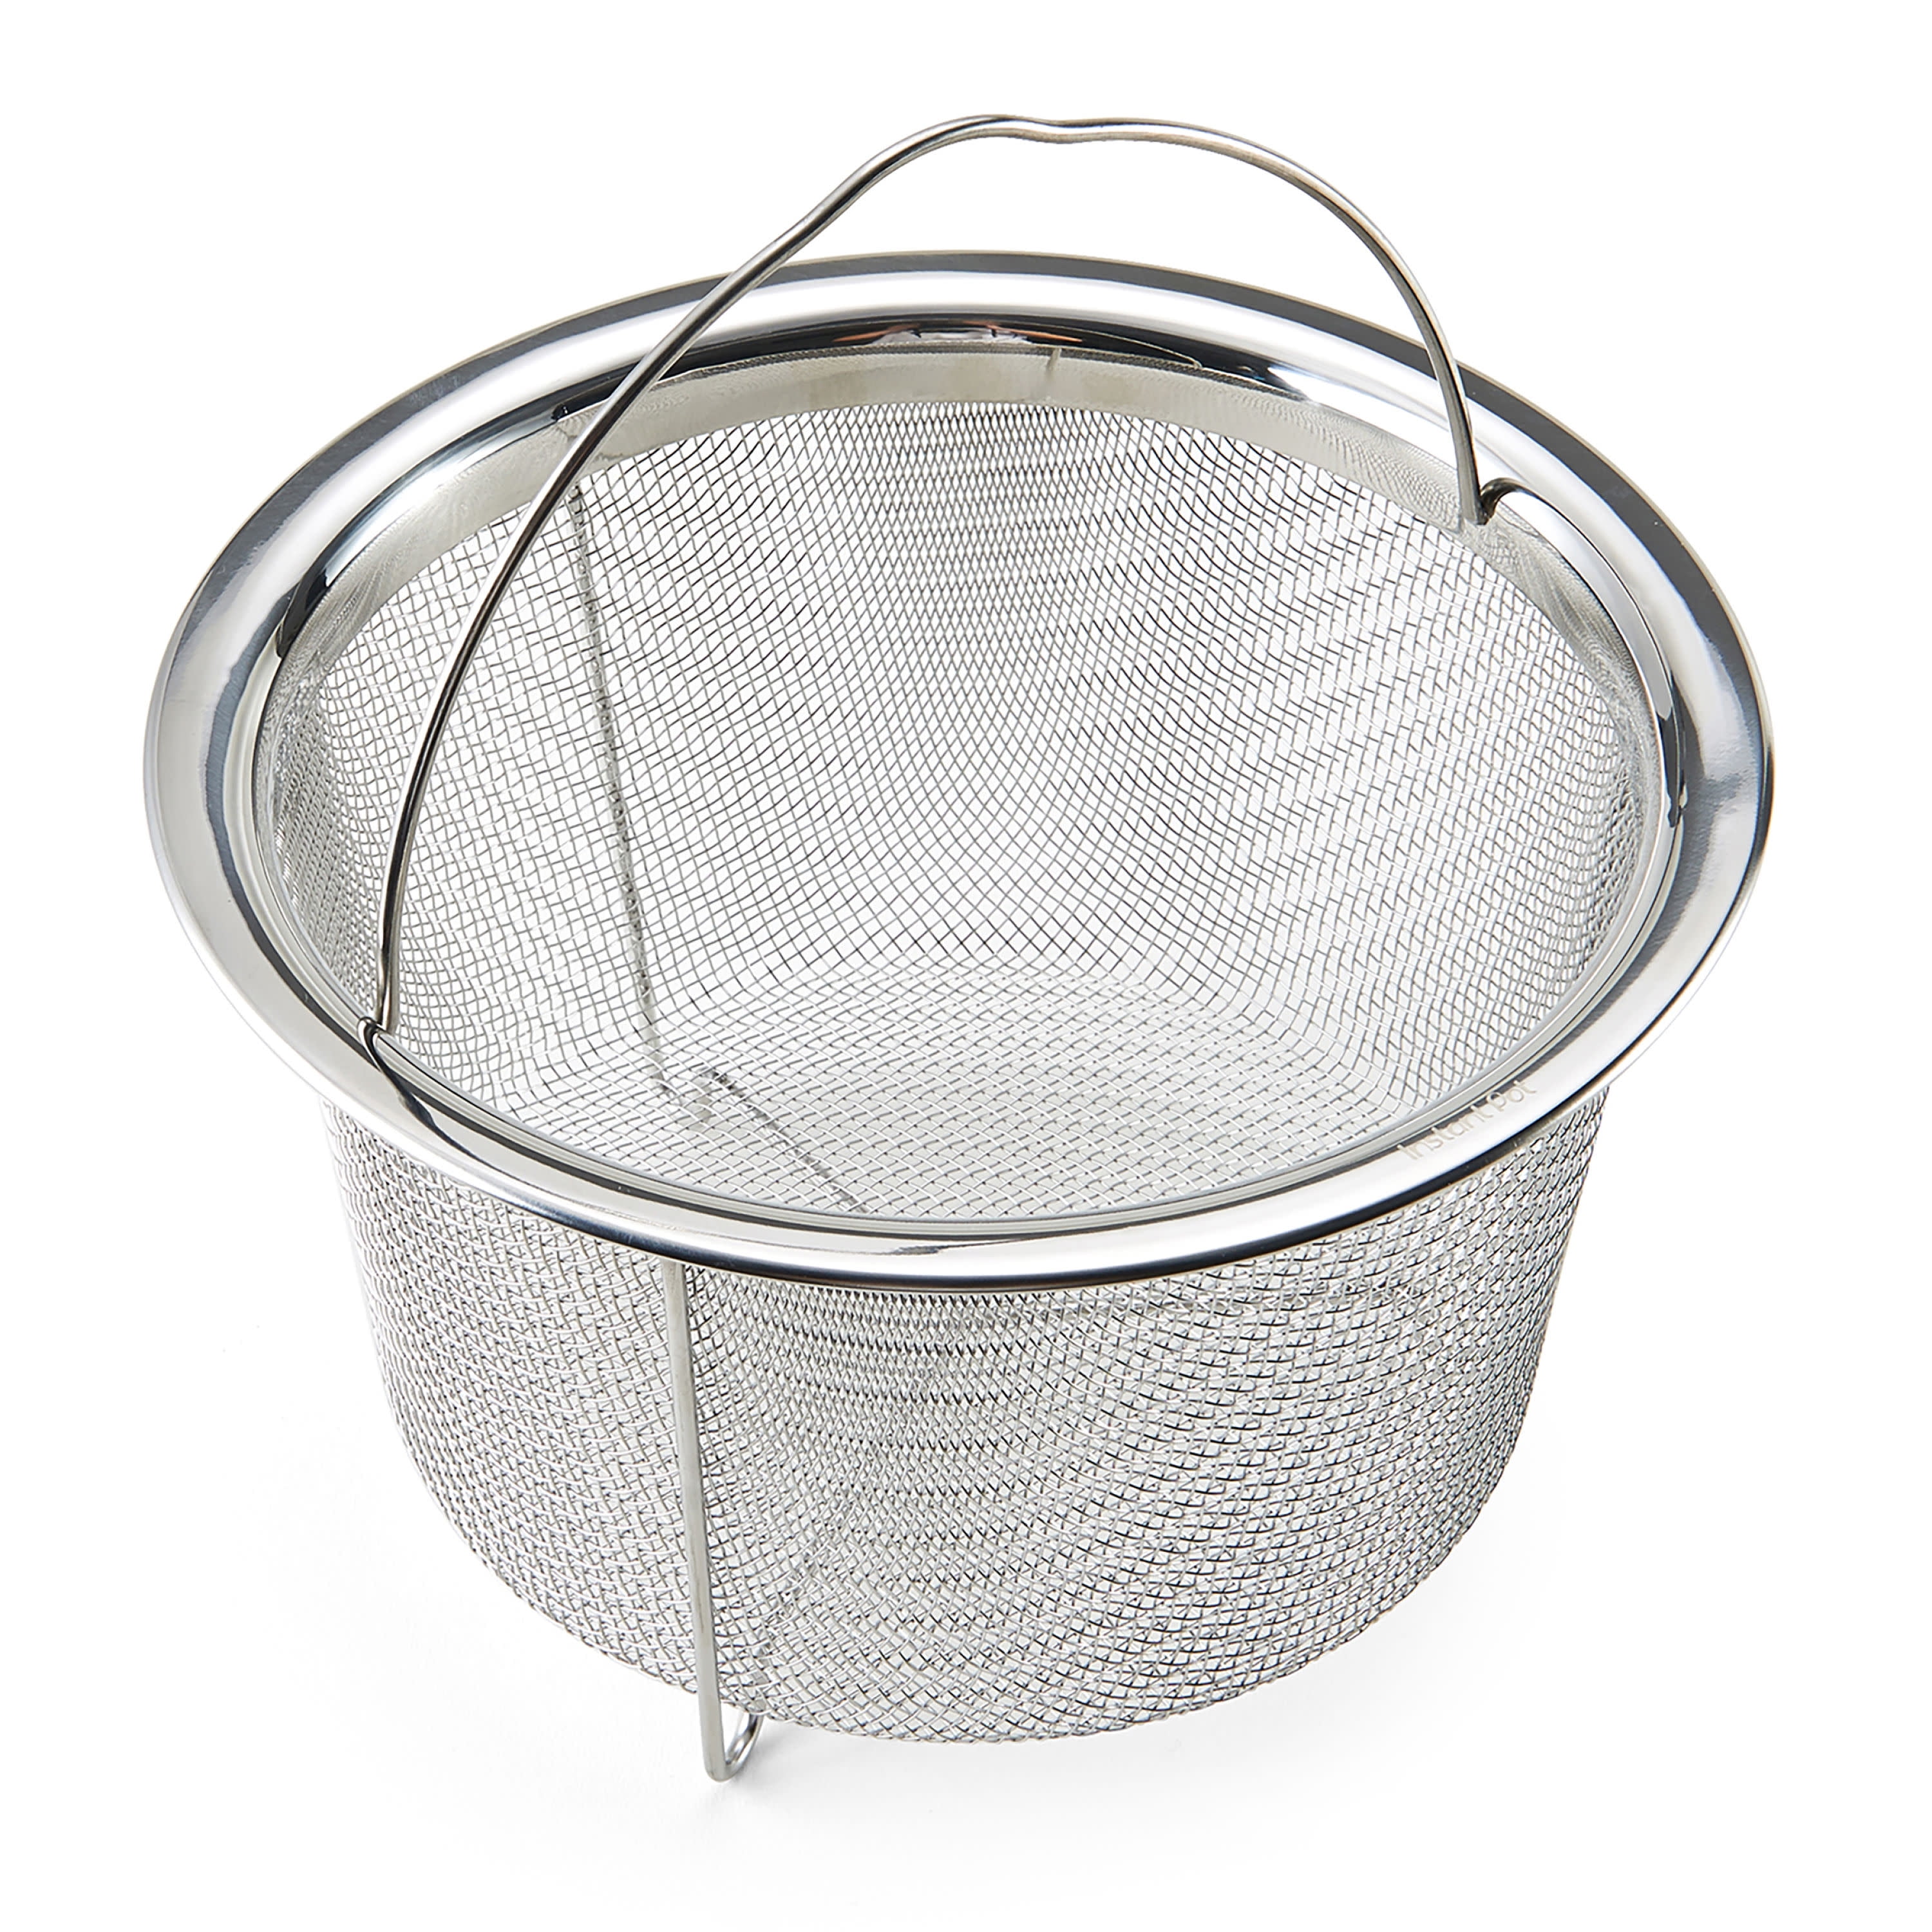 Geek Daily Deals Mar. 28, 2019: Steamer Basket for Your Instant Pot Cooker  Just $10 Today! - GeekDad